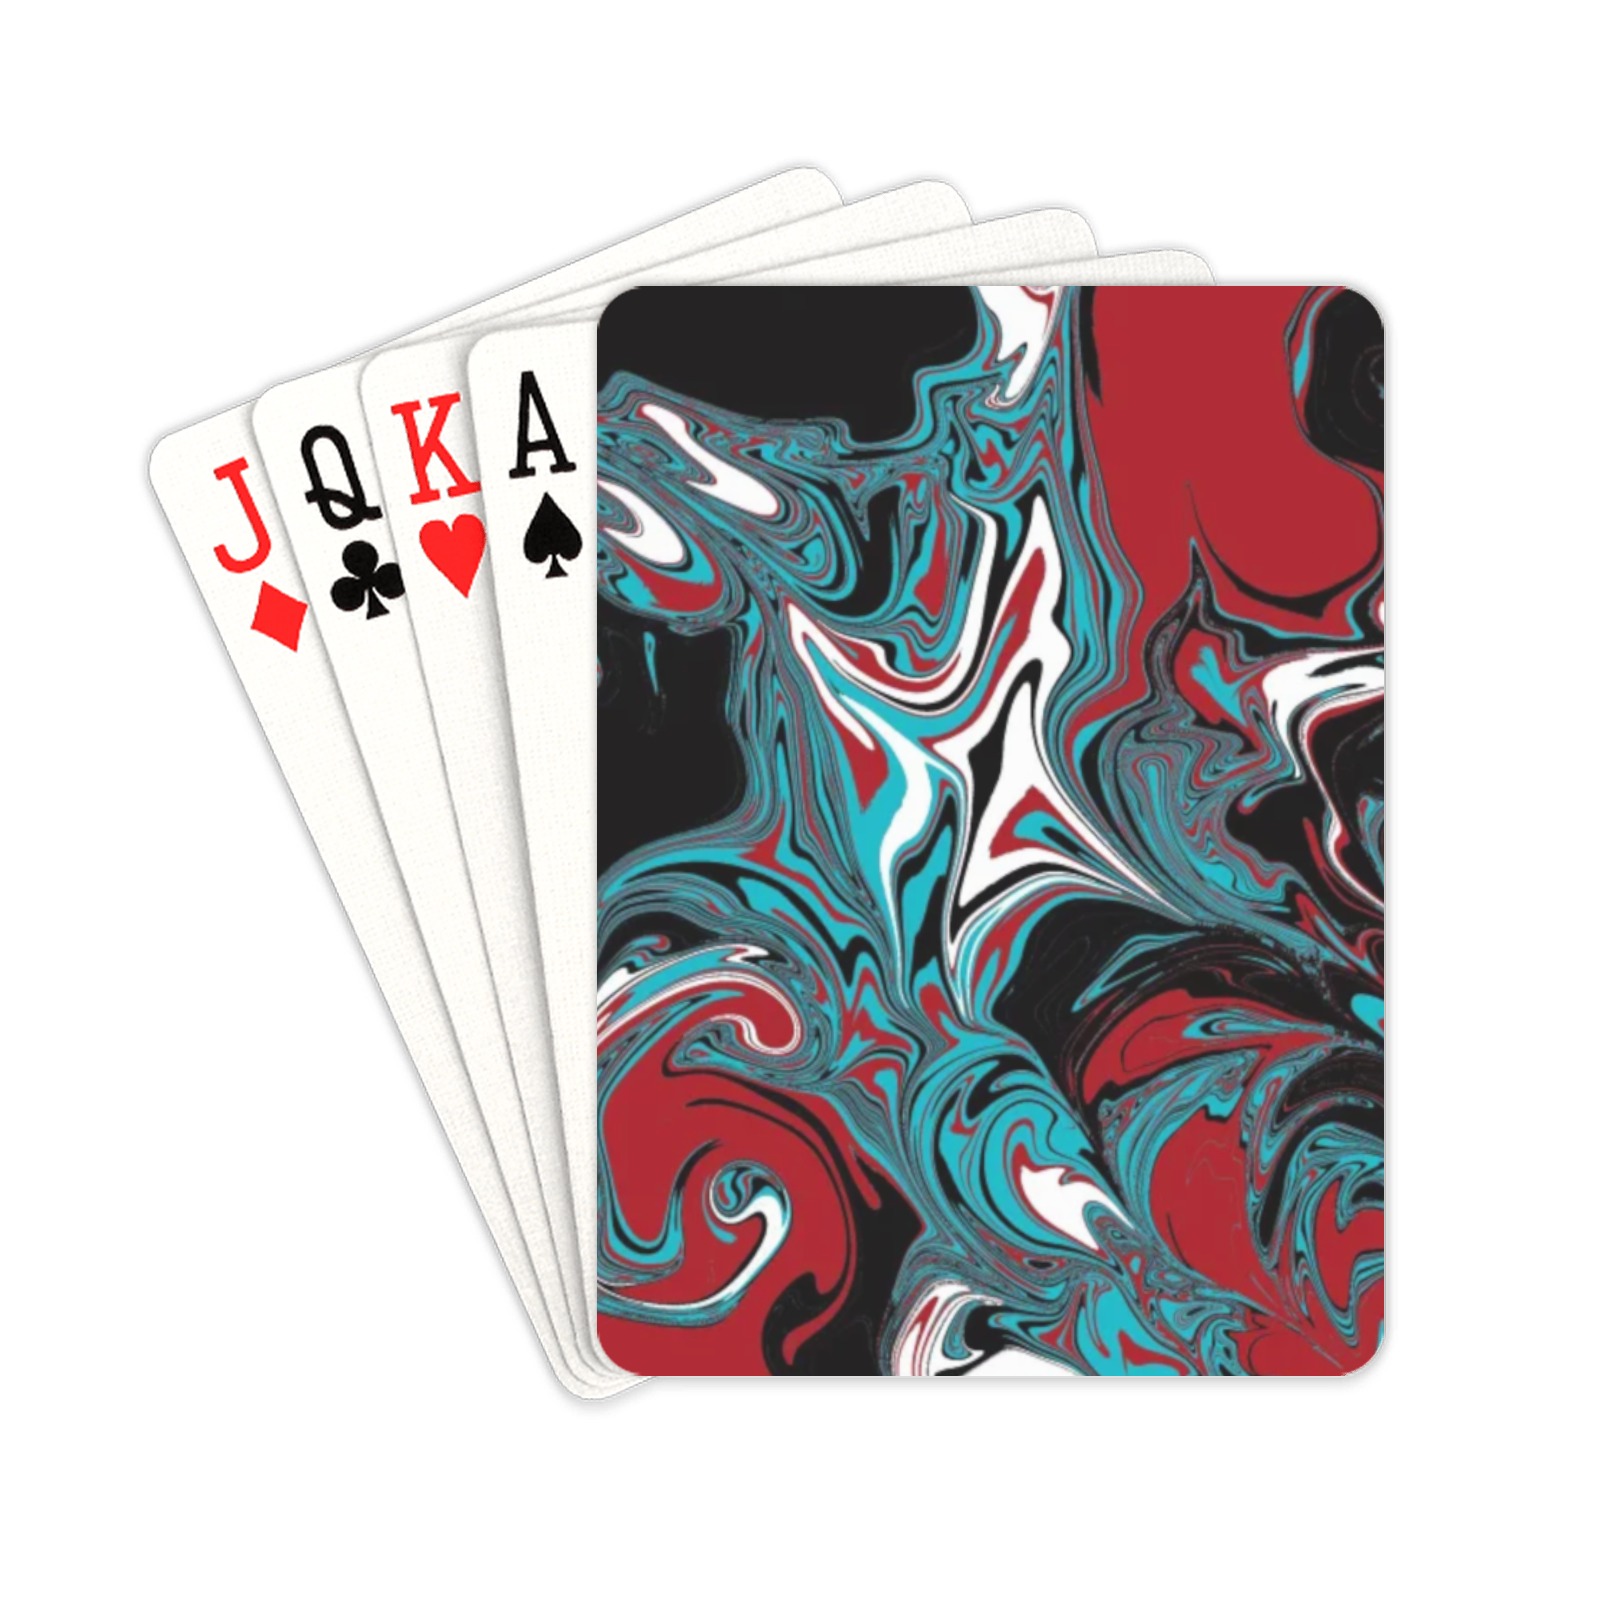 Dark Wave of Colors Playing Cards 2.5"x3.5"